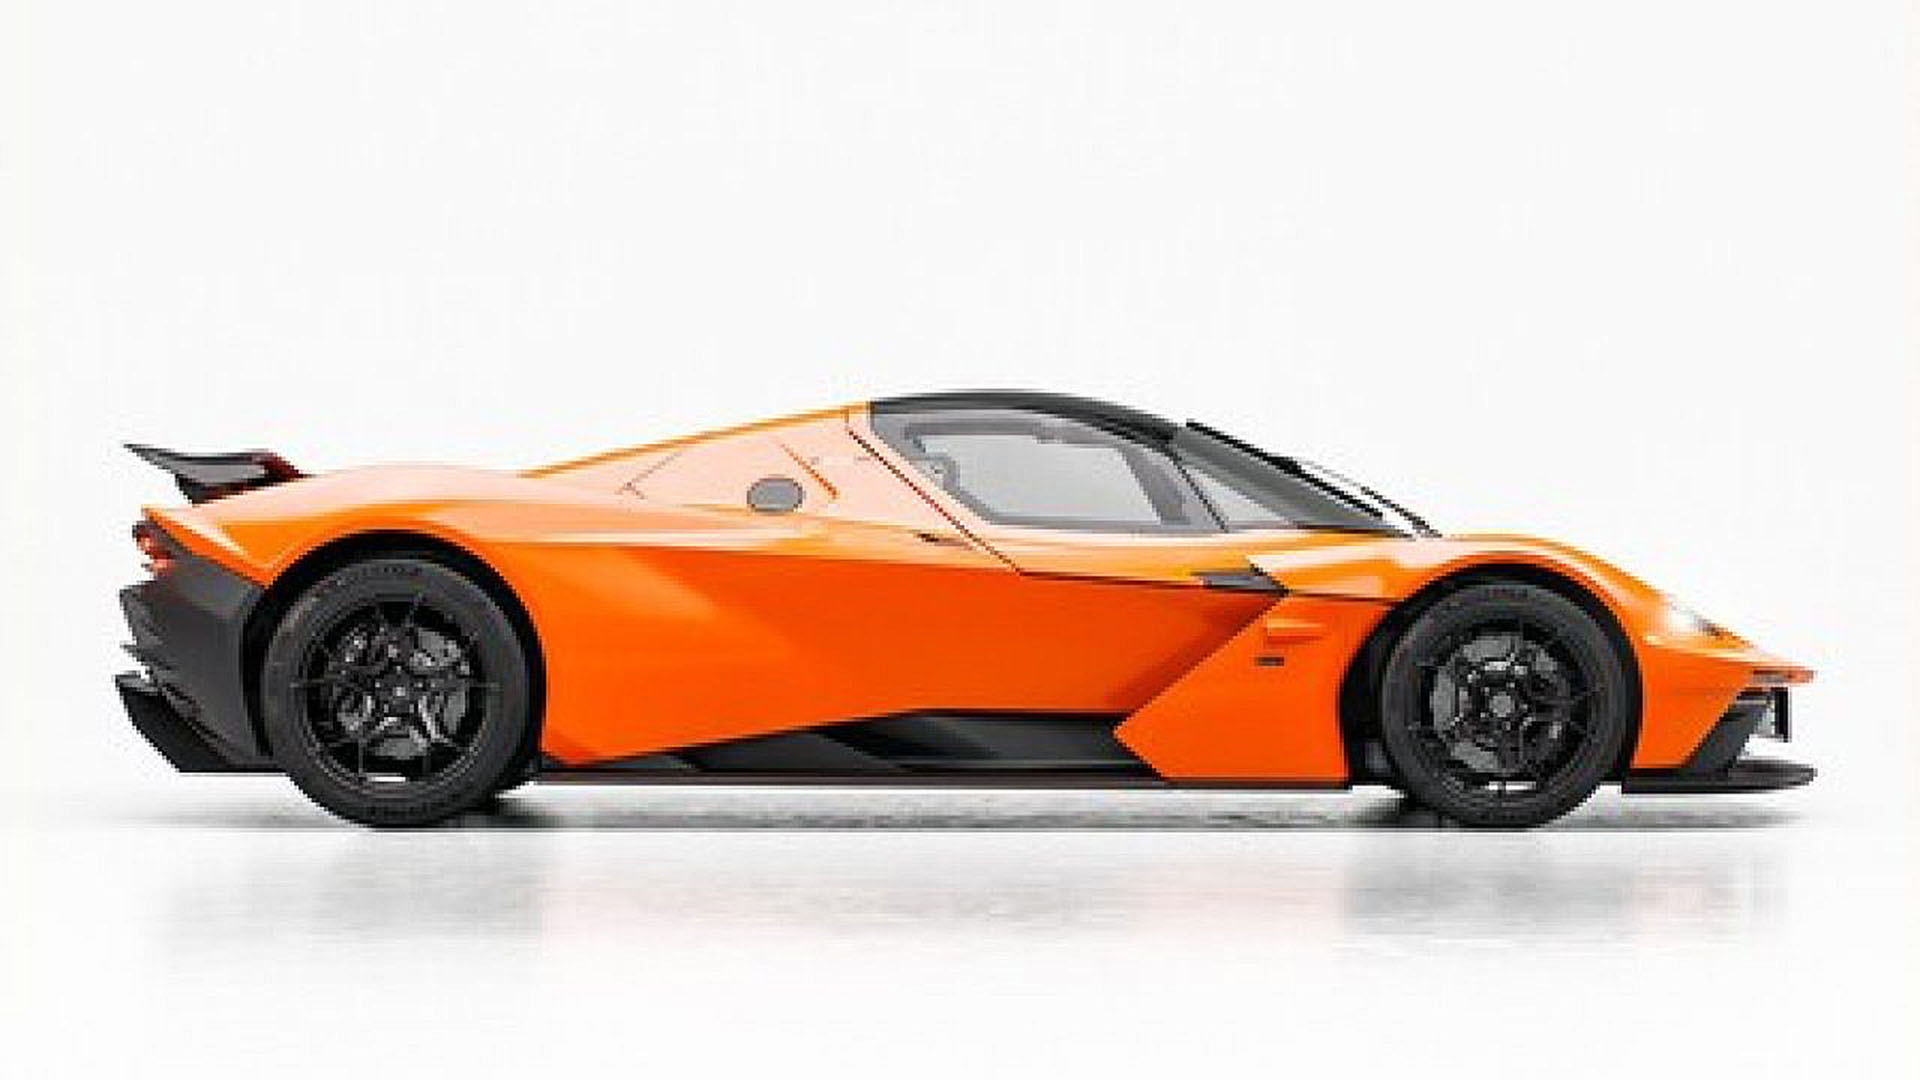 The Ktm X-Bow Gt-Xr Has More Clearance And Suspension Travel, In Addition To The Traditional High-Speed Roll